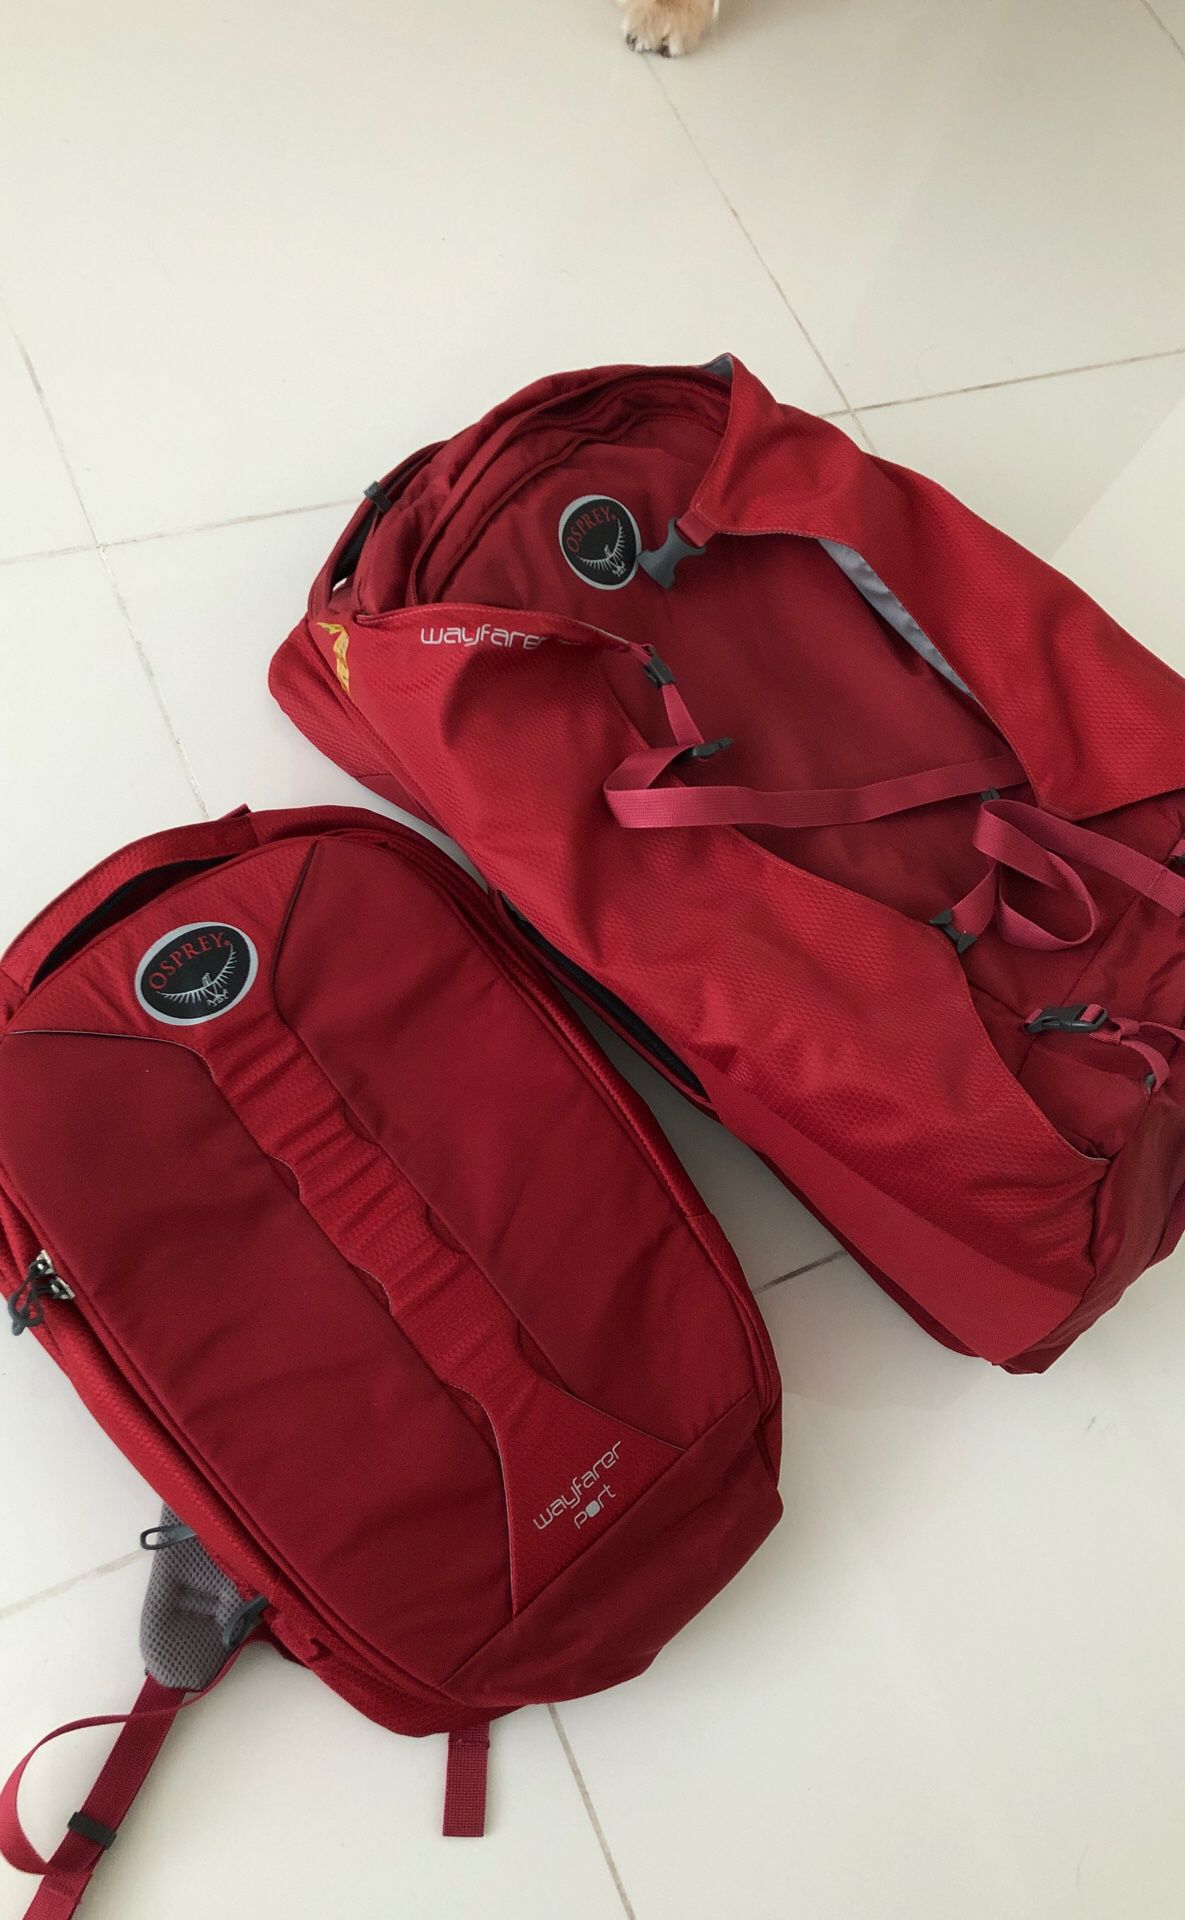 Travel/ camping Osprey backpack 70lts